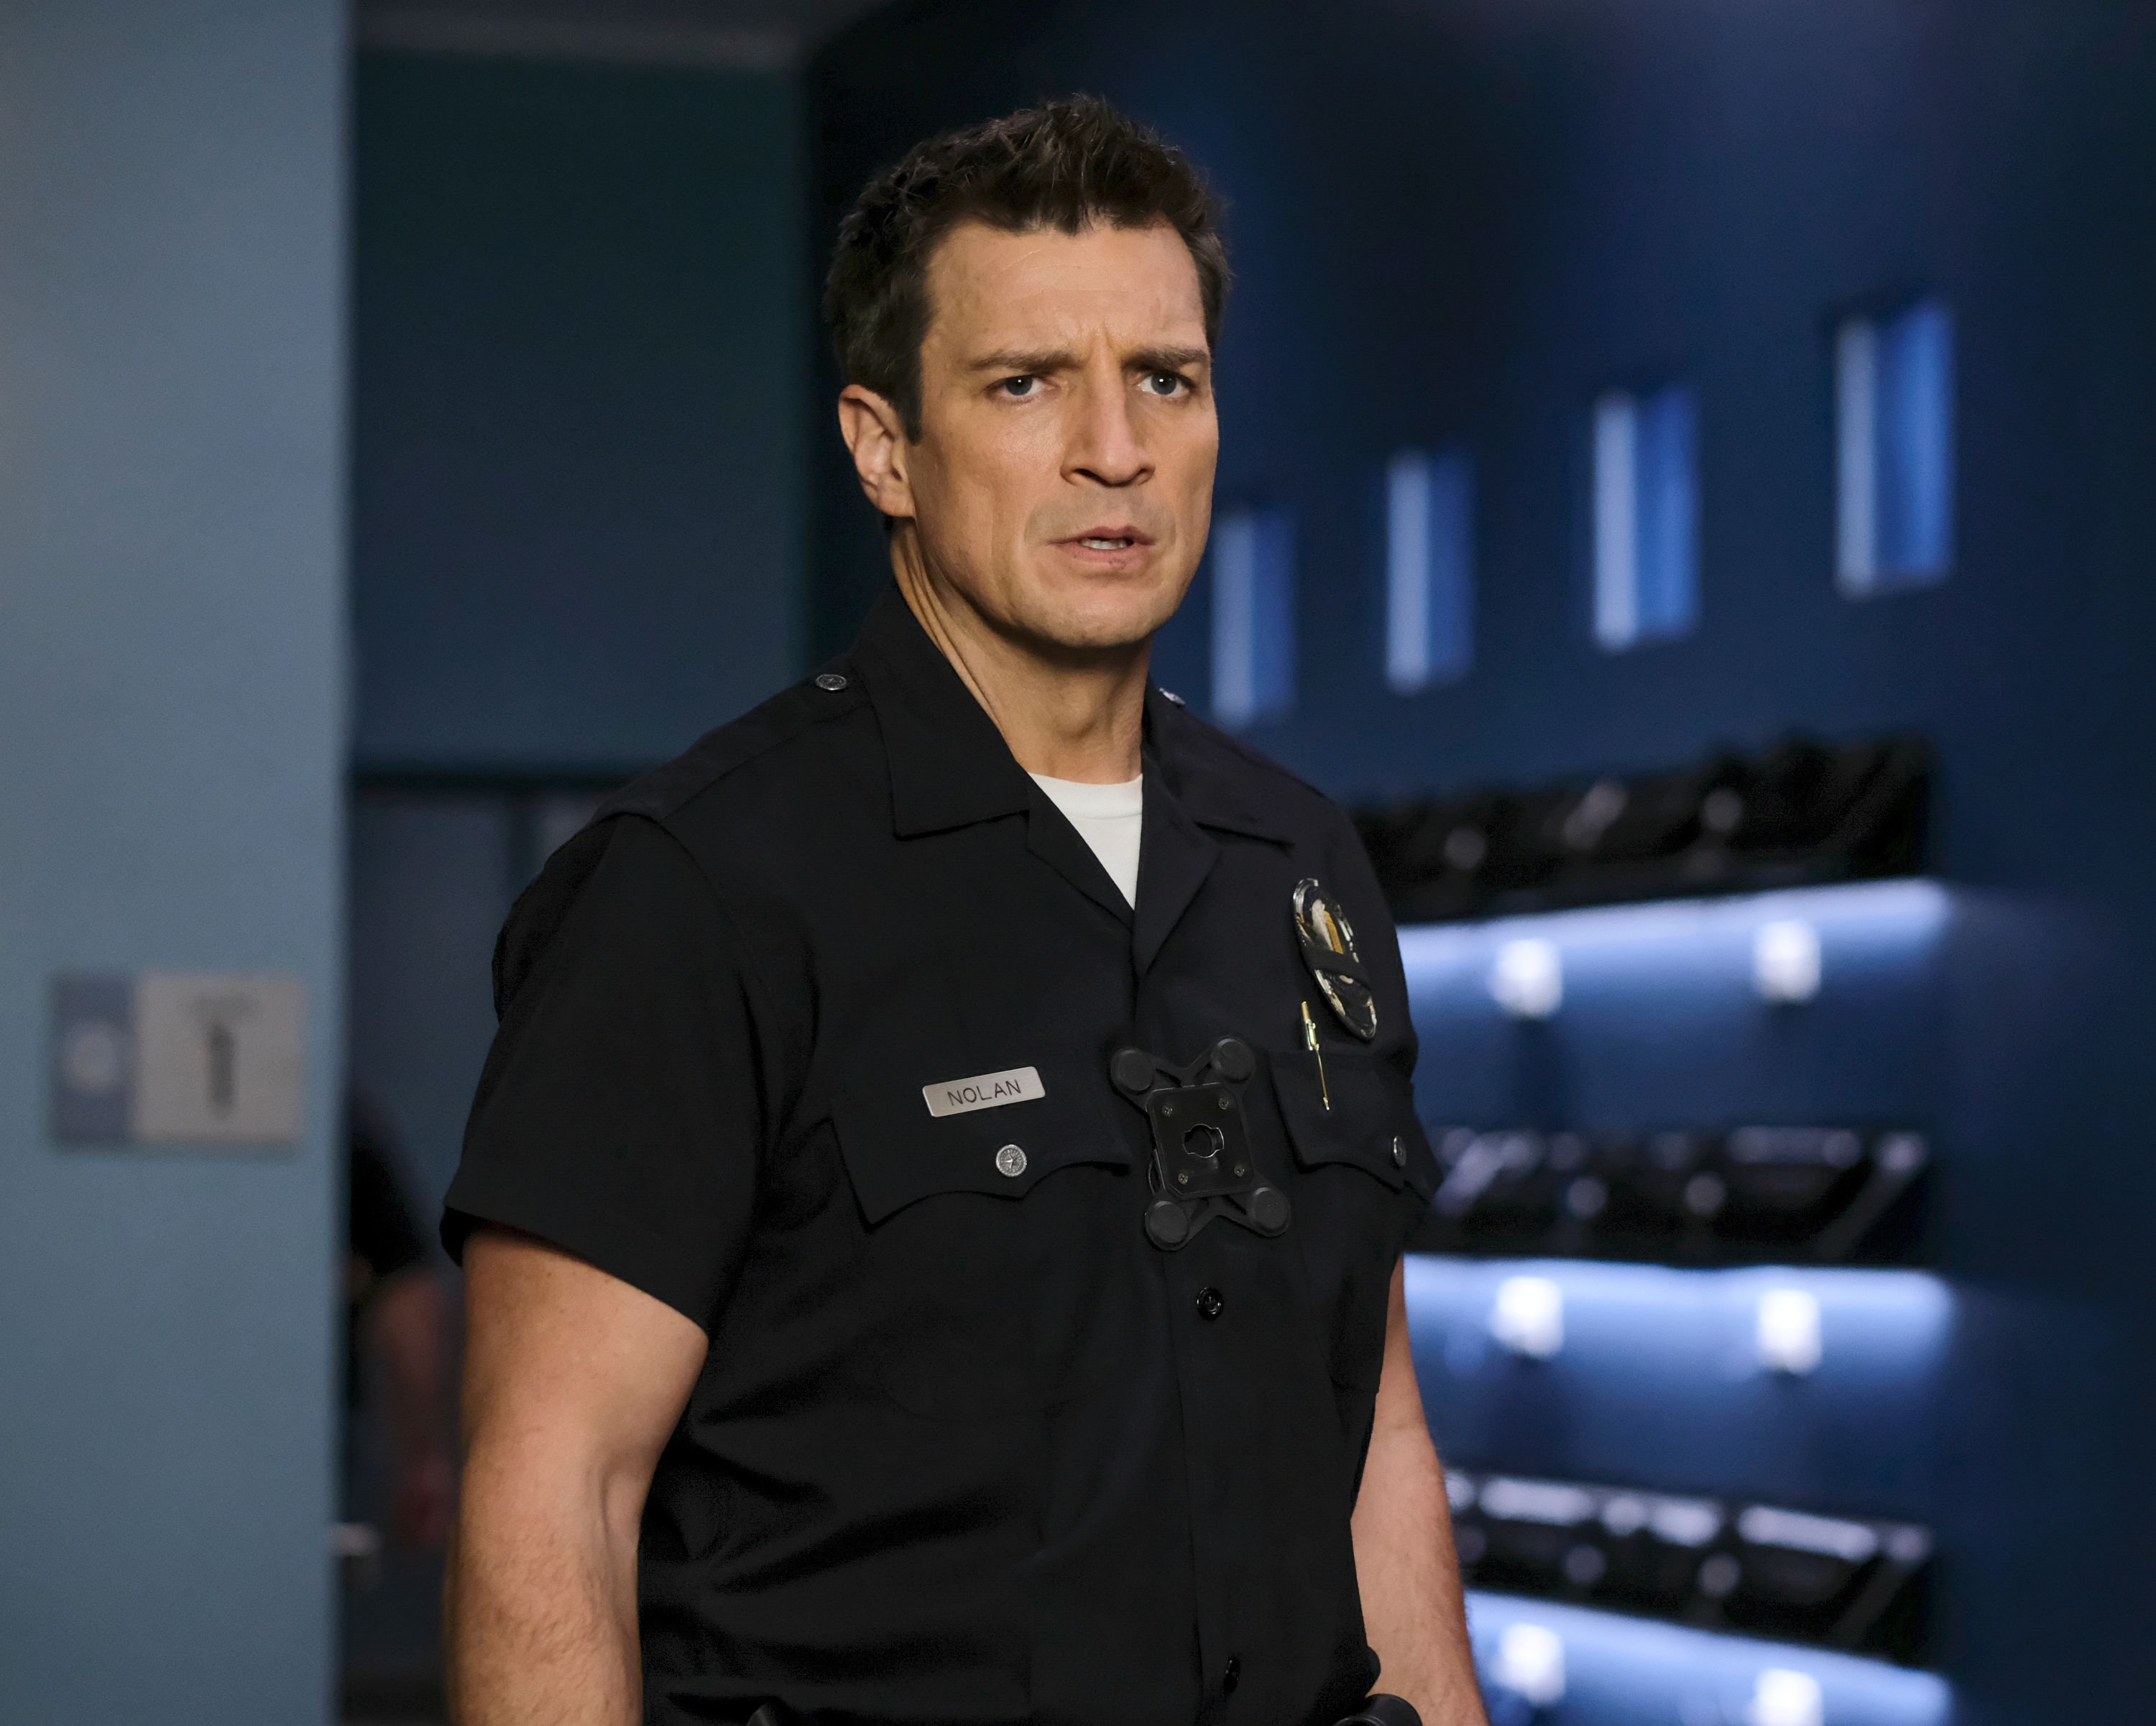 Nathan Fillion in ABC's "The Rookie" - Season Two. | Source: Getty Images